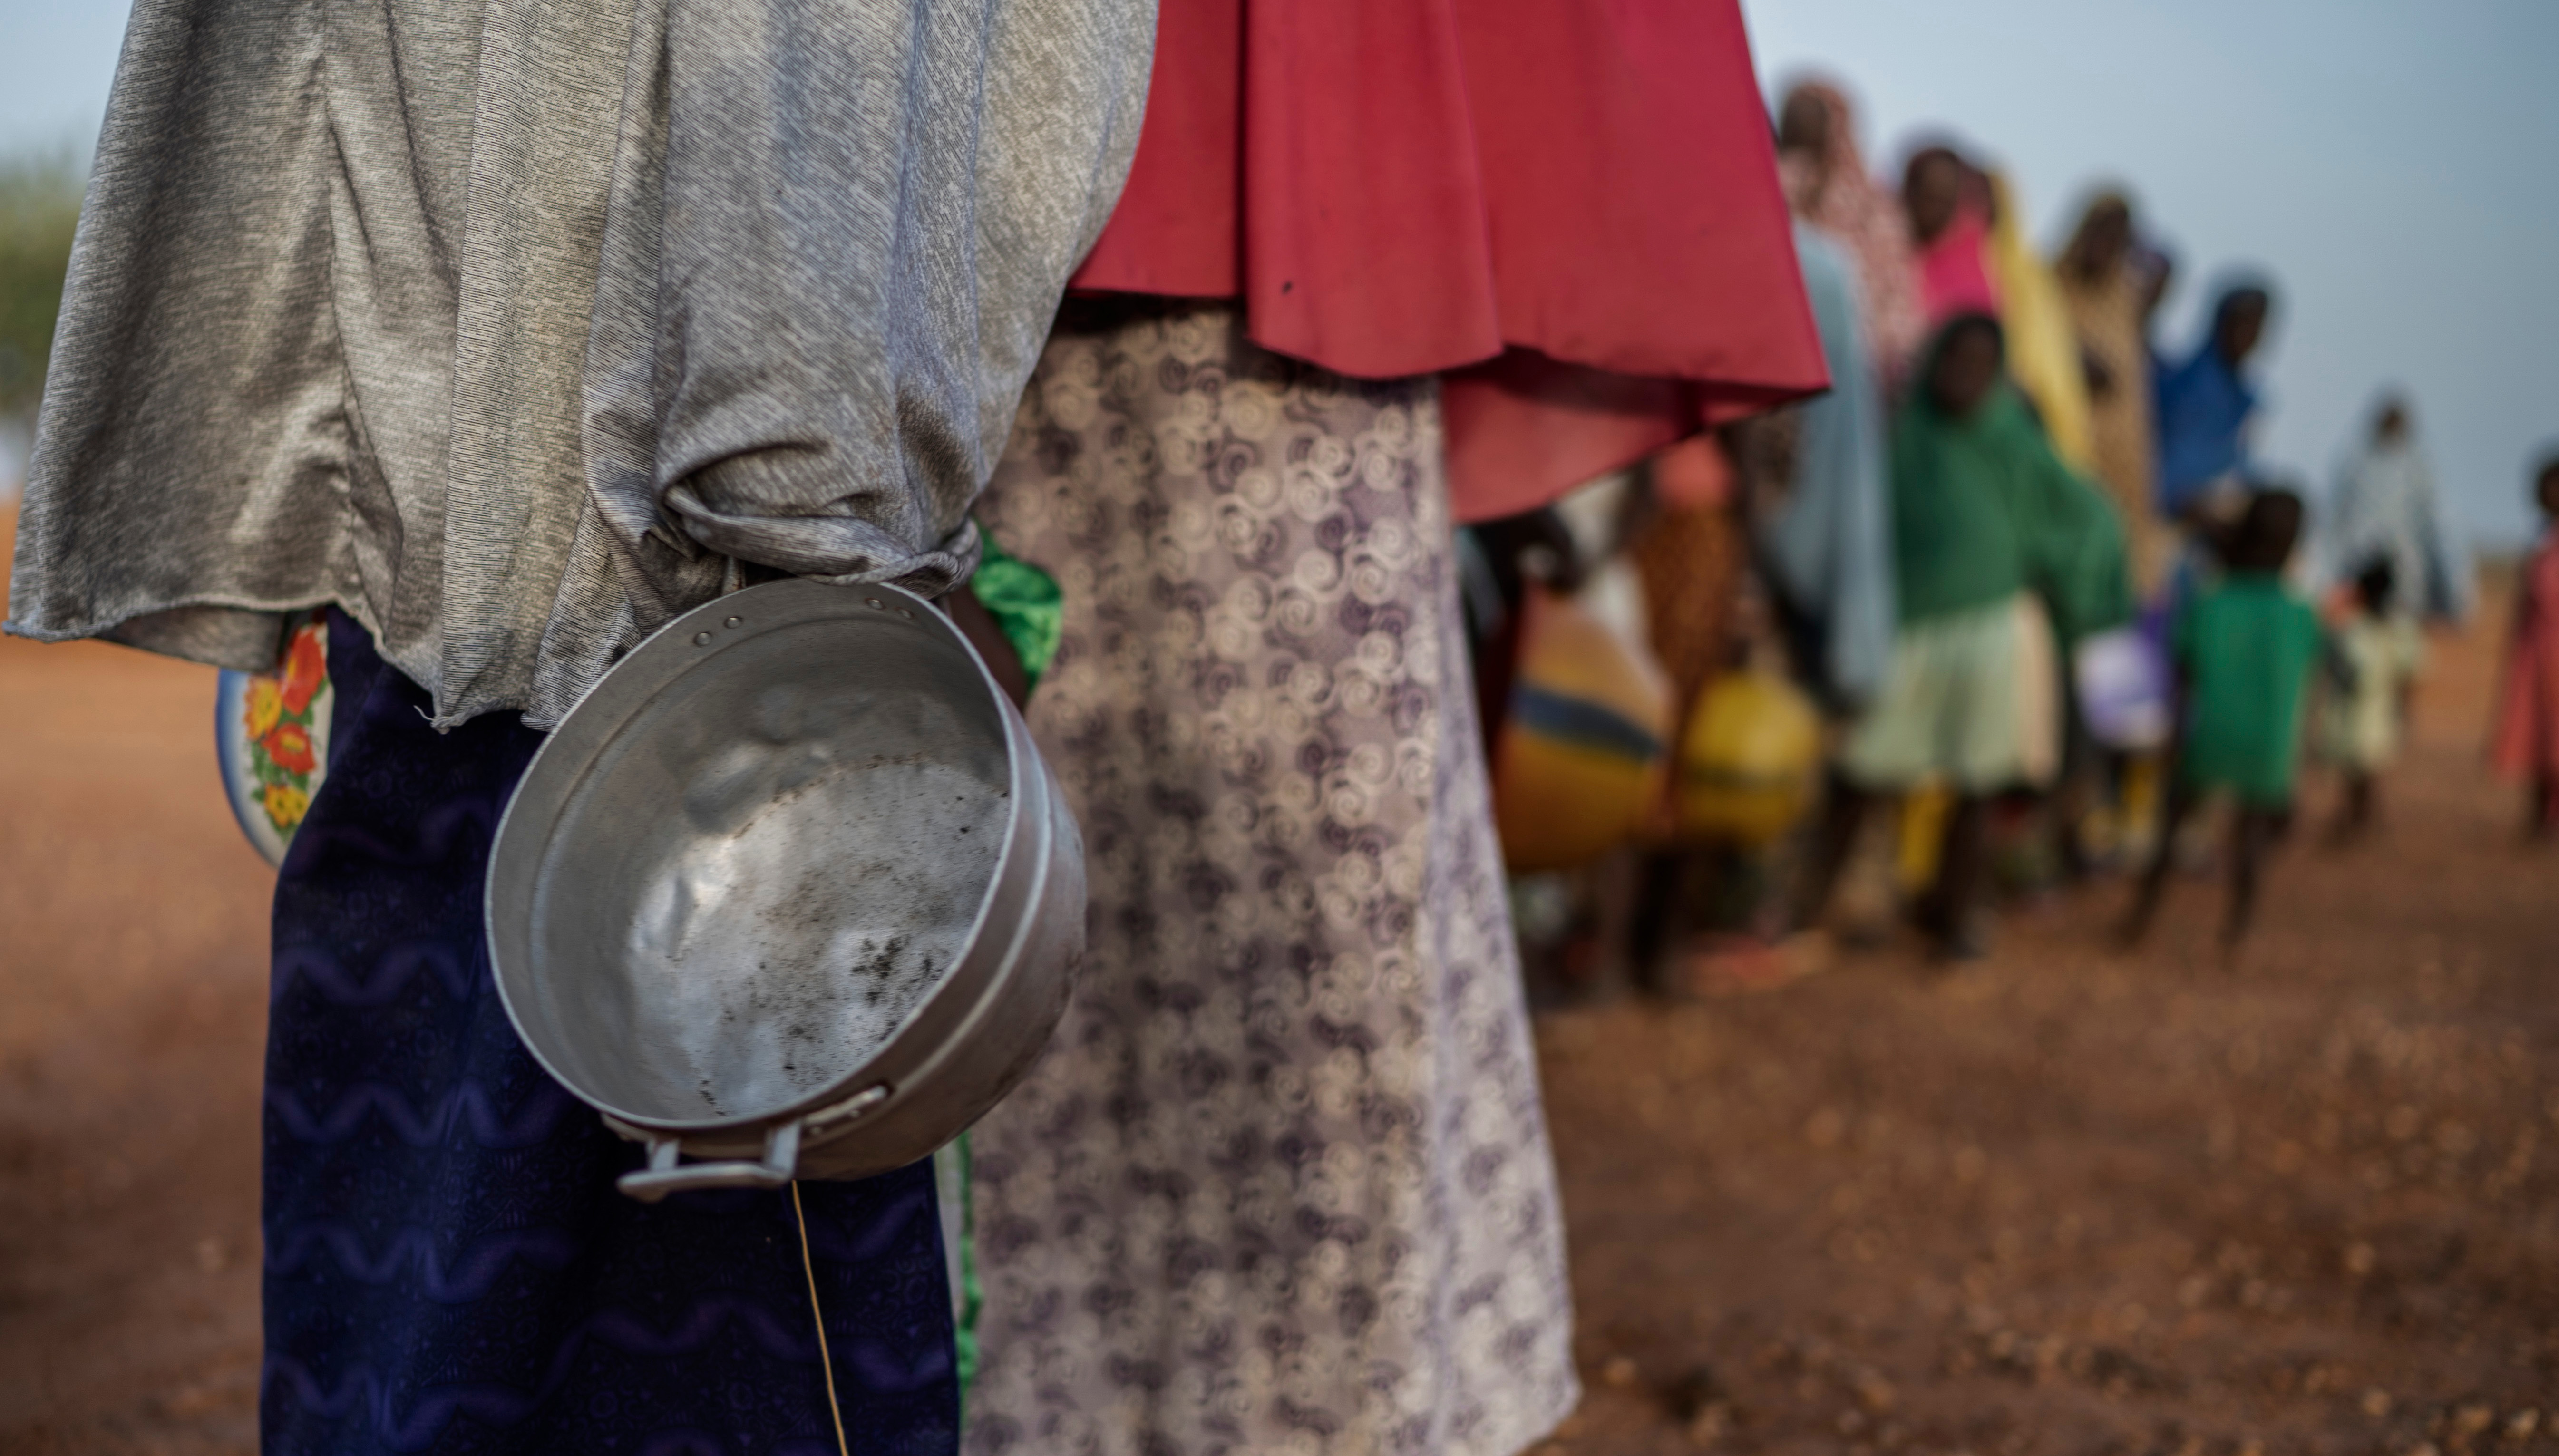  There's not enough for everyone. Empty food bowls in areas in a country in crisis. 